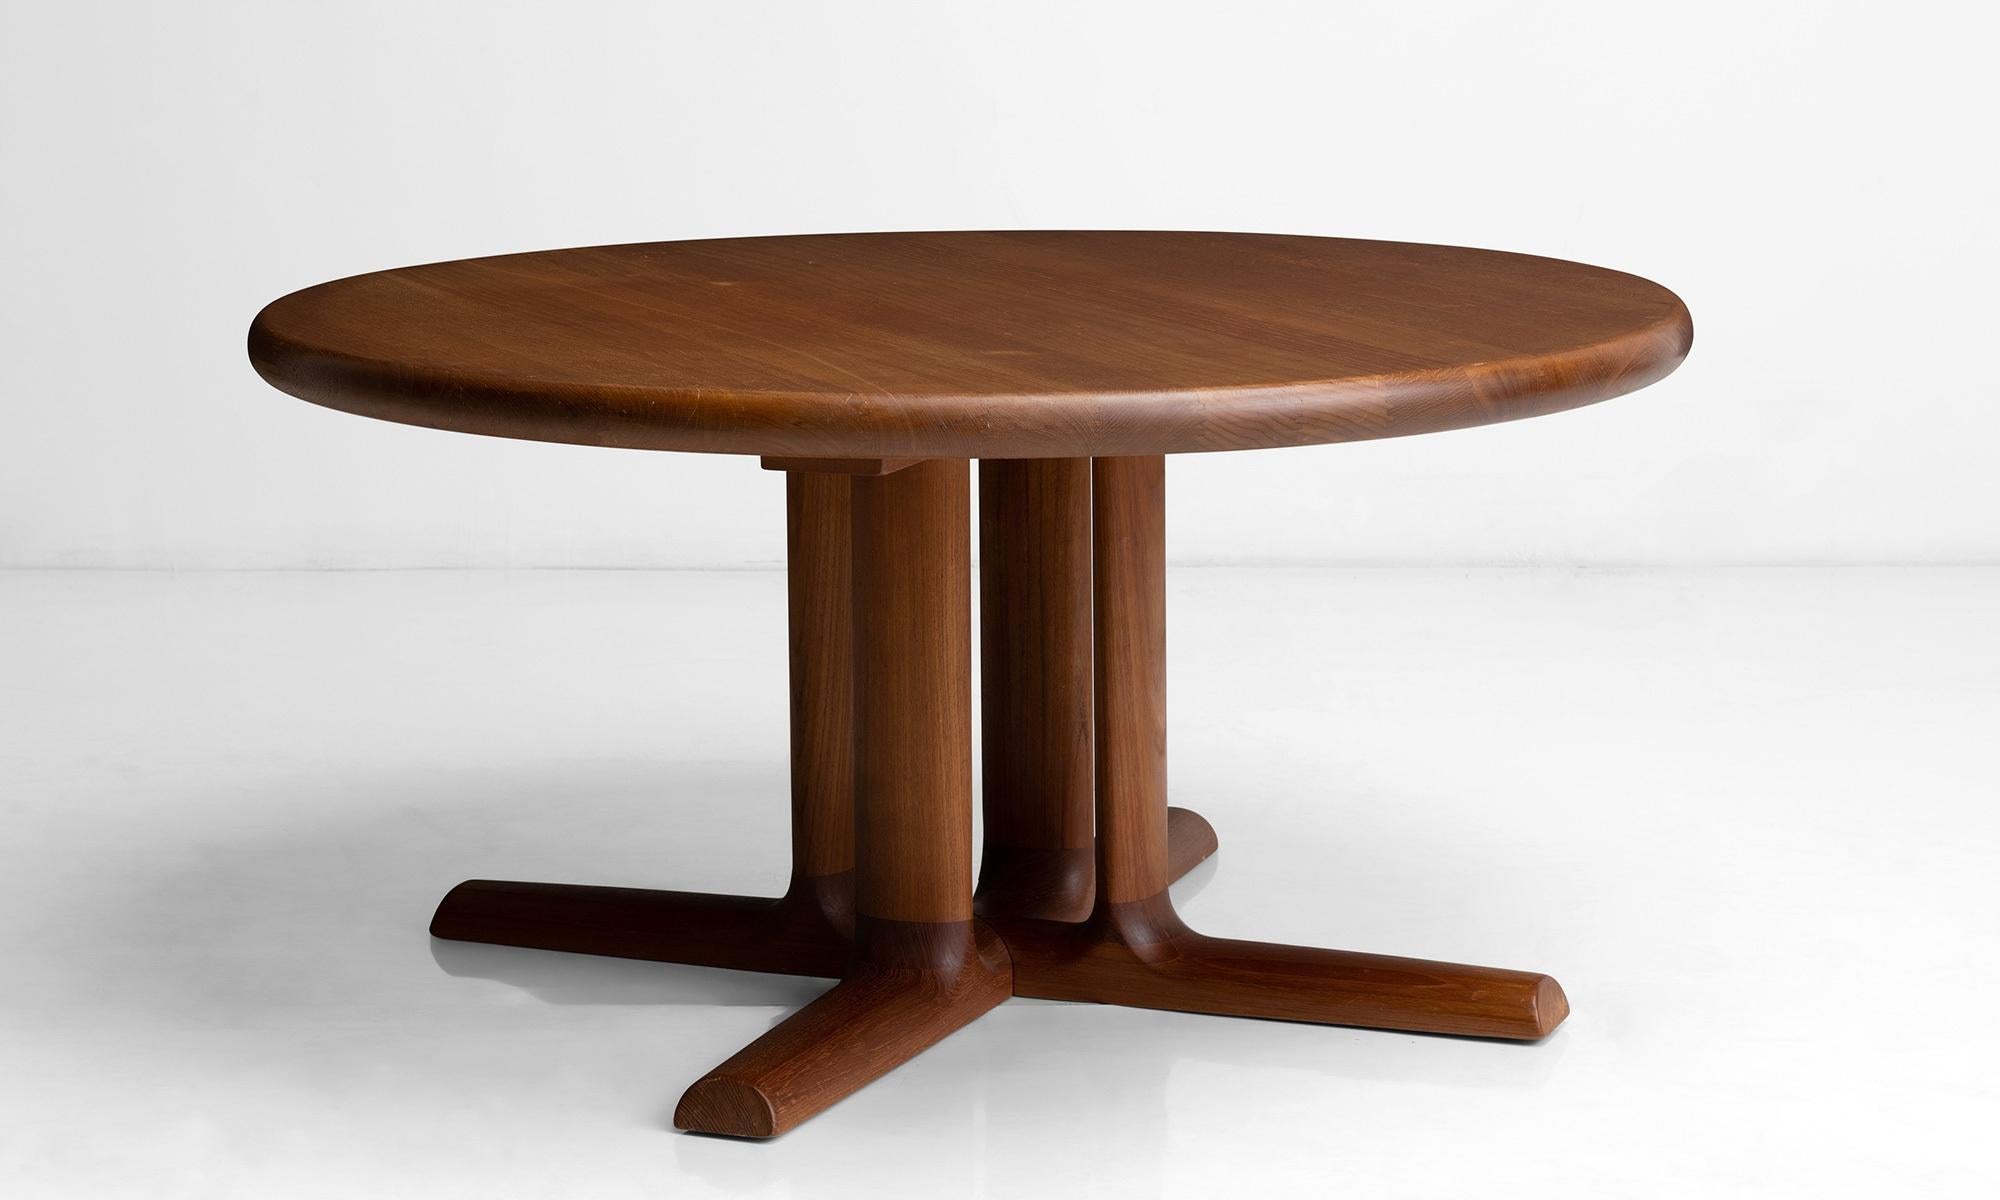 Teak coffee table

Denmark circa 1960

Round table constructed in solid teak by Dyrlund, with maker's mark.

Measures: 40